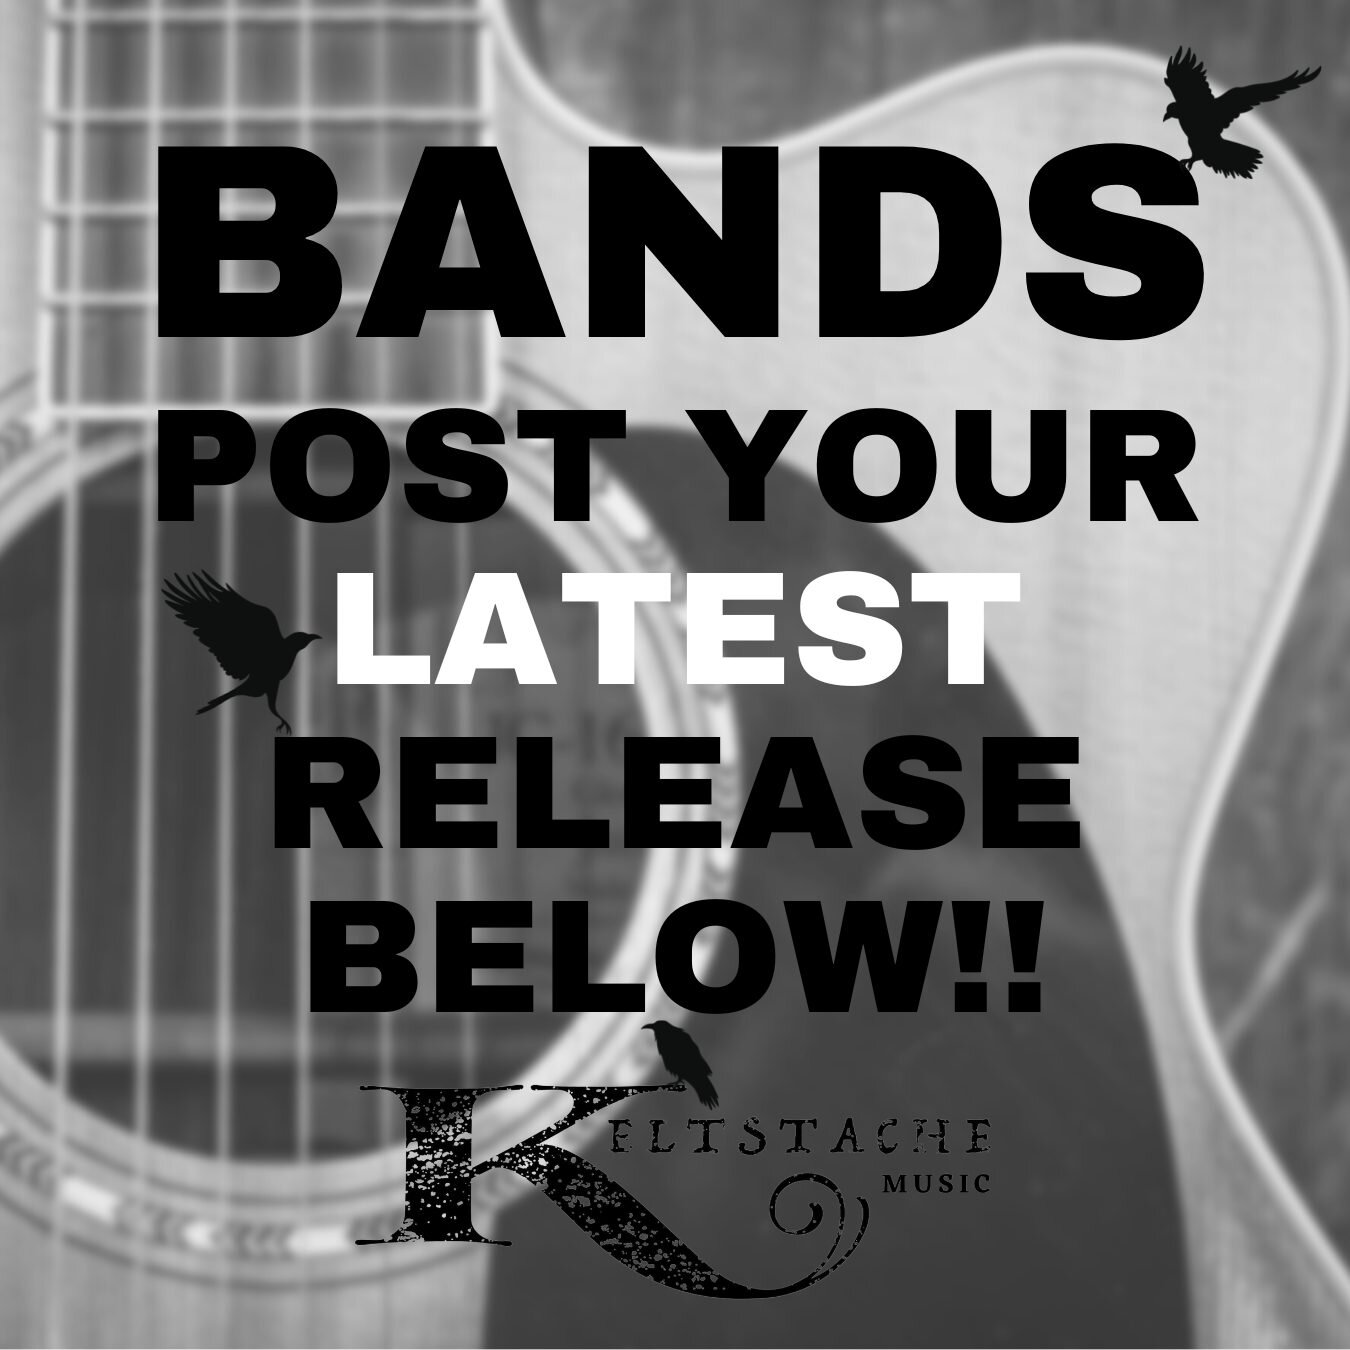 Are you an indie artist on the rise? Want to spread the word about your latest release? Look no further! Post your indie releases below and let's showcase the beauty of indie music and talented indie artists to the world. Let's support each other in 